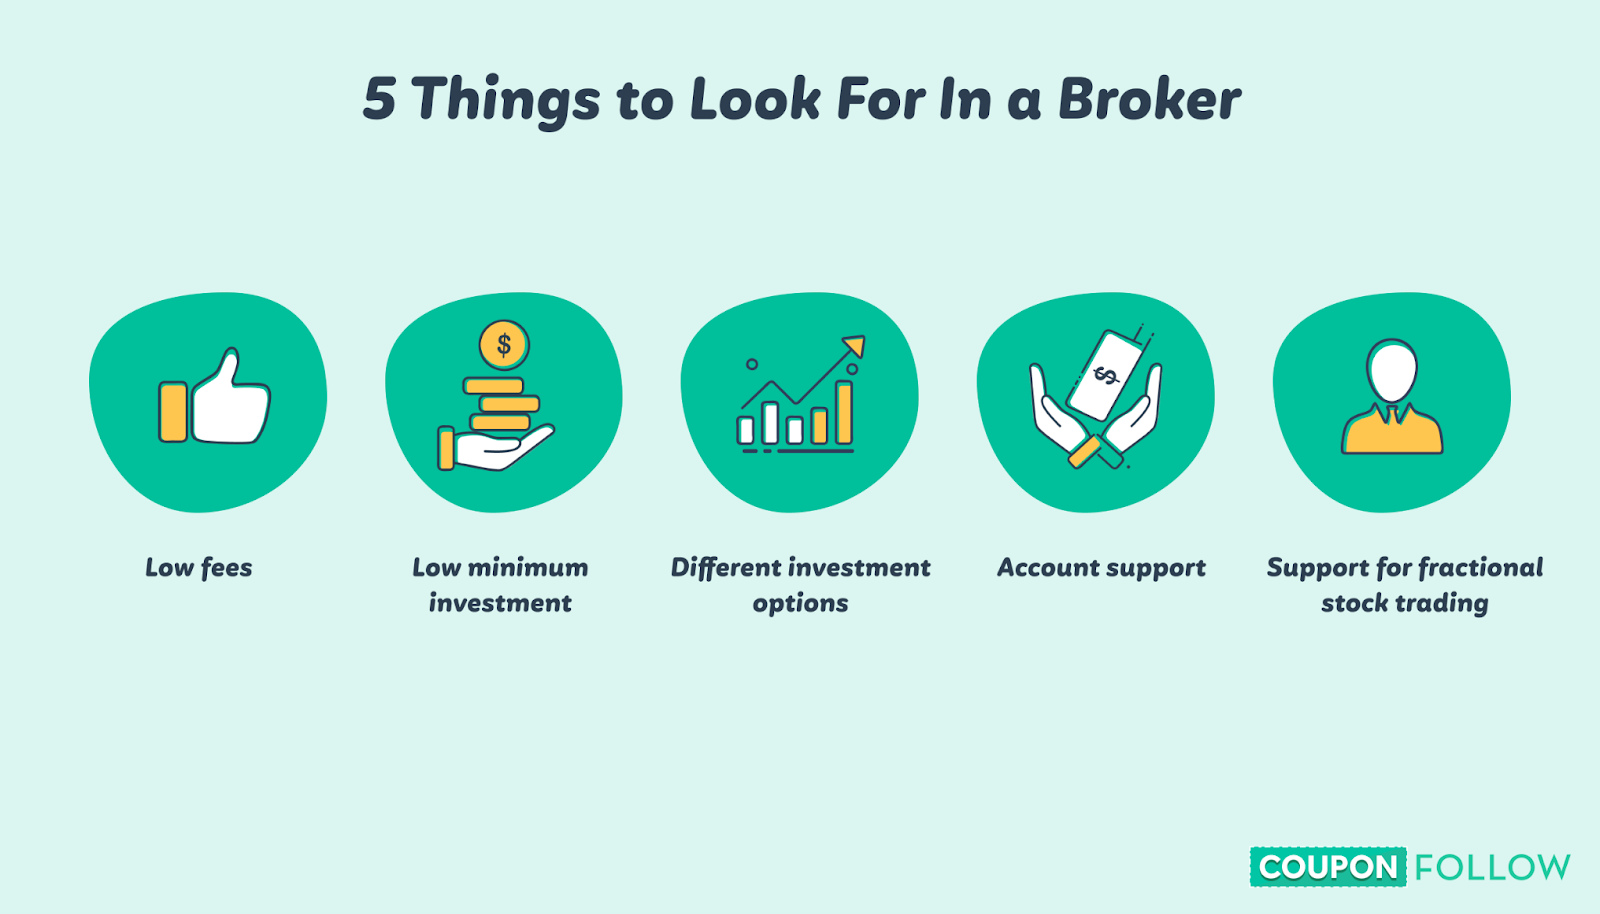 List of 5 things to look for in a broker as icons